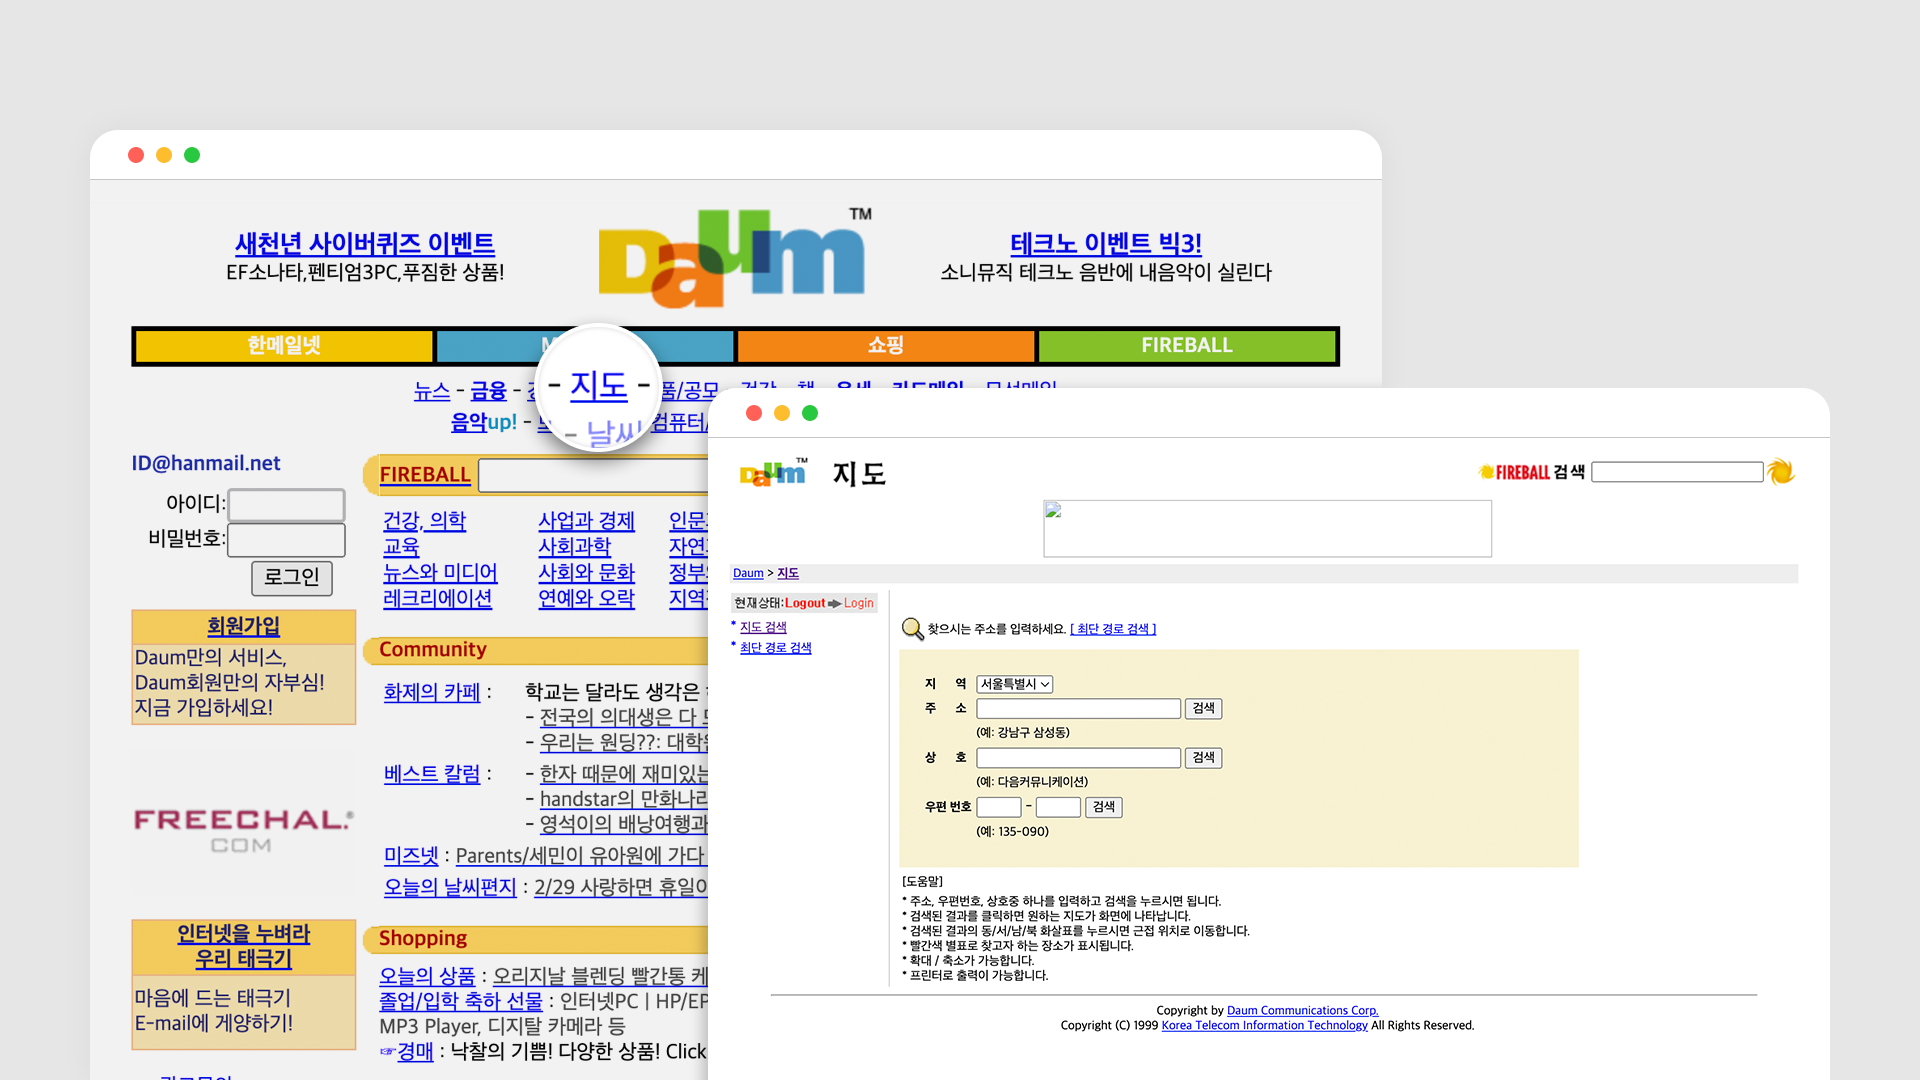 Daum featuring its 'Map' service at the top of the main page Archive from February 2000